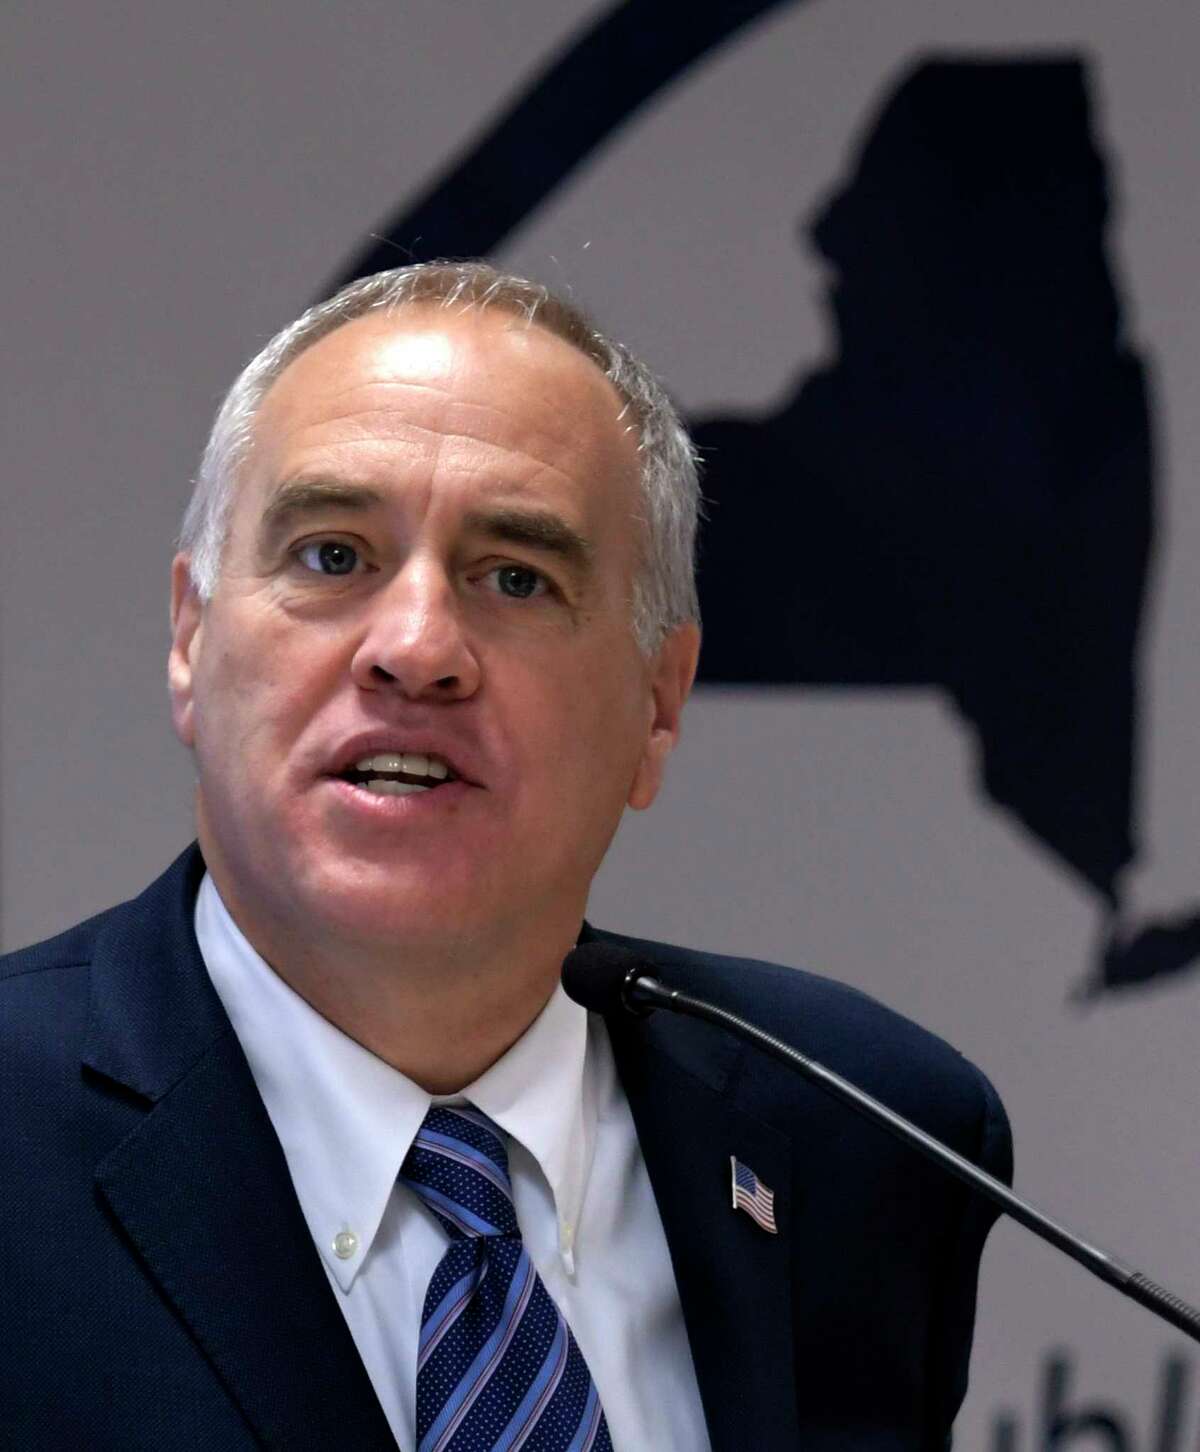 Comptroller Thomas DiNapoli spoke to a gathering of members of the Retired Public Employees Association at the Marriott Wolf Road on Wednesday, Sept. 28, 2016, in Colonie, N.Y. (Skip Dickstein/Times Union)